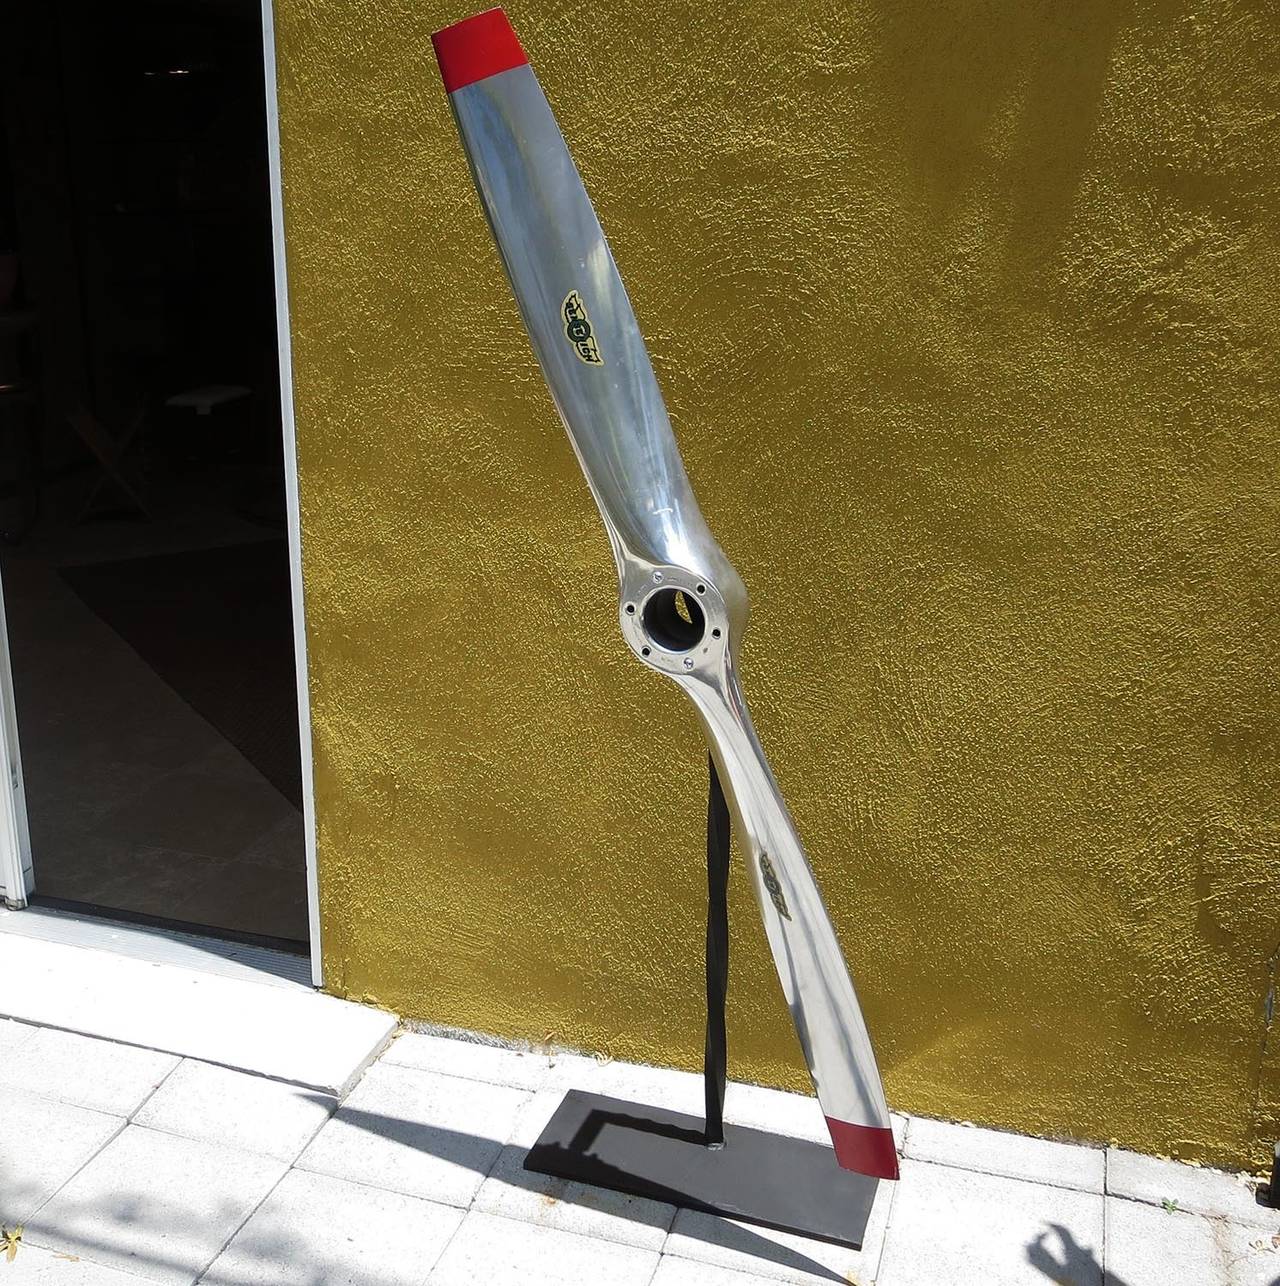 A Sensenich cast and polished aluminum propellor, complete with original decals and painted tips. The sculptural propellor free spins on a painted steel floor Stand. The length of the prop is 64 1/2 inches, although the overall height is taller,